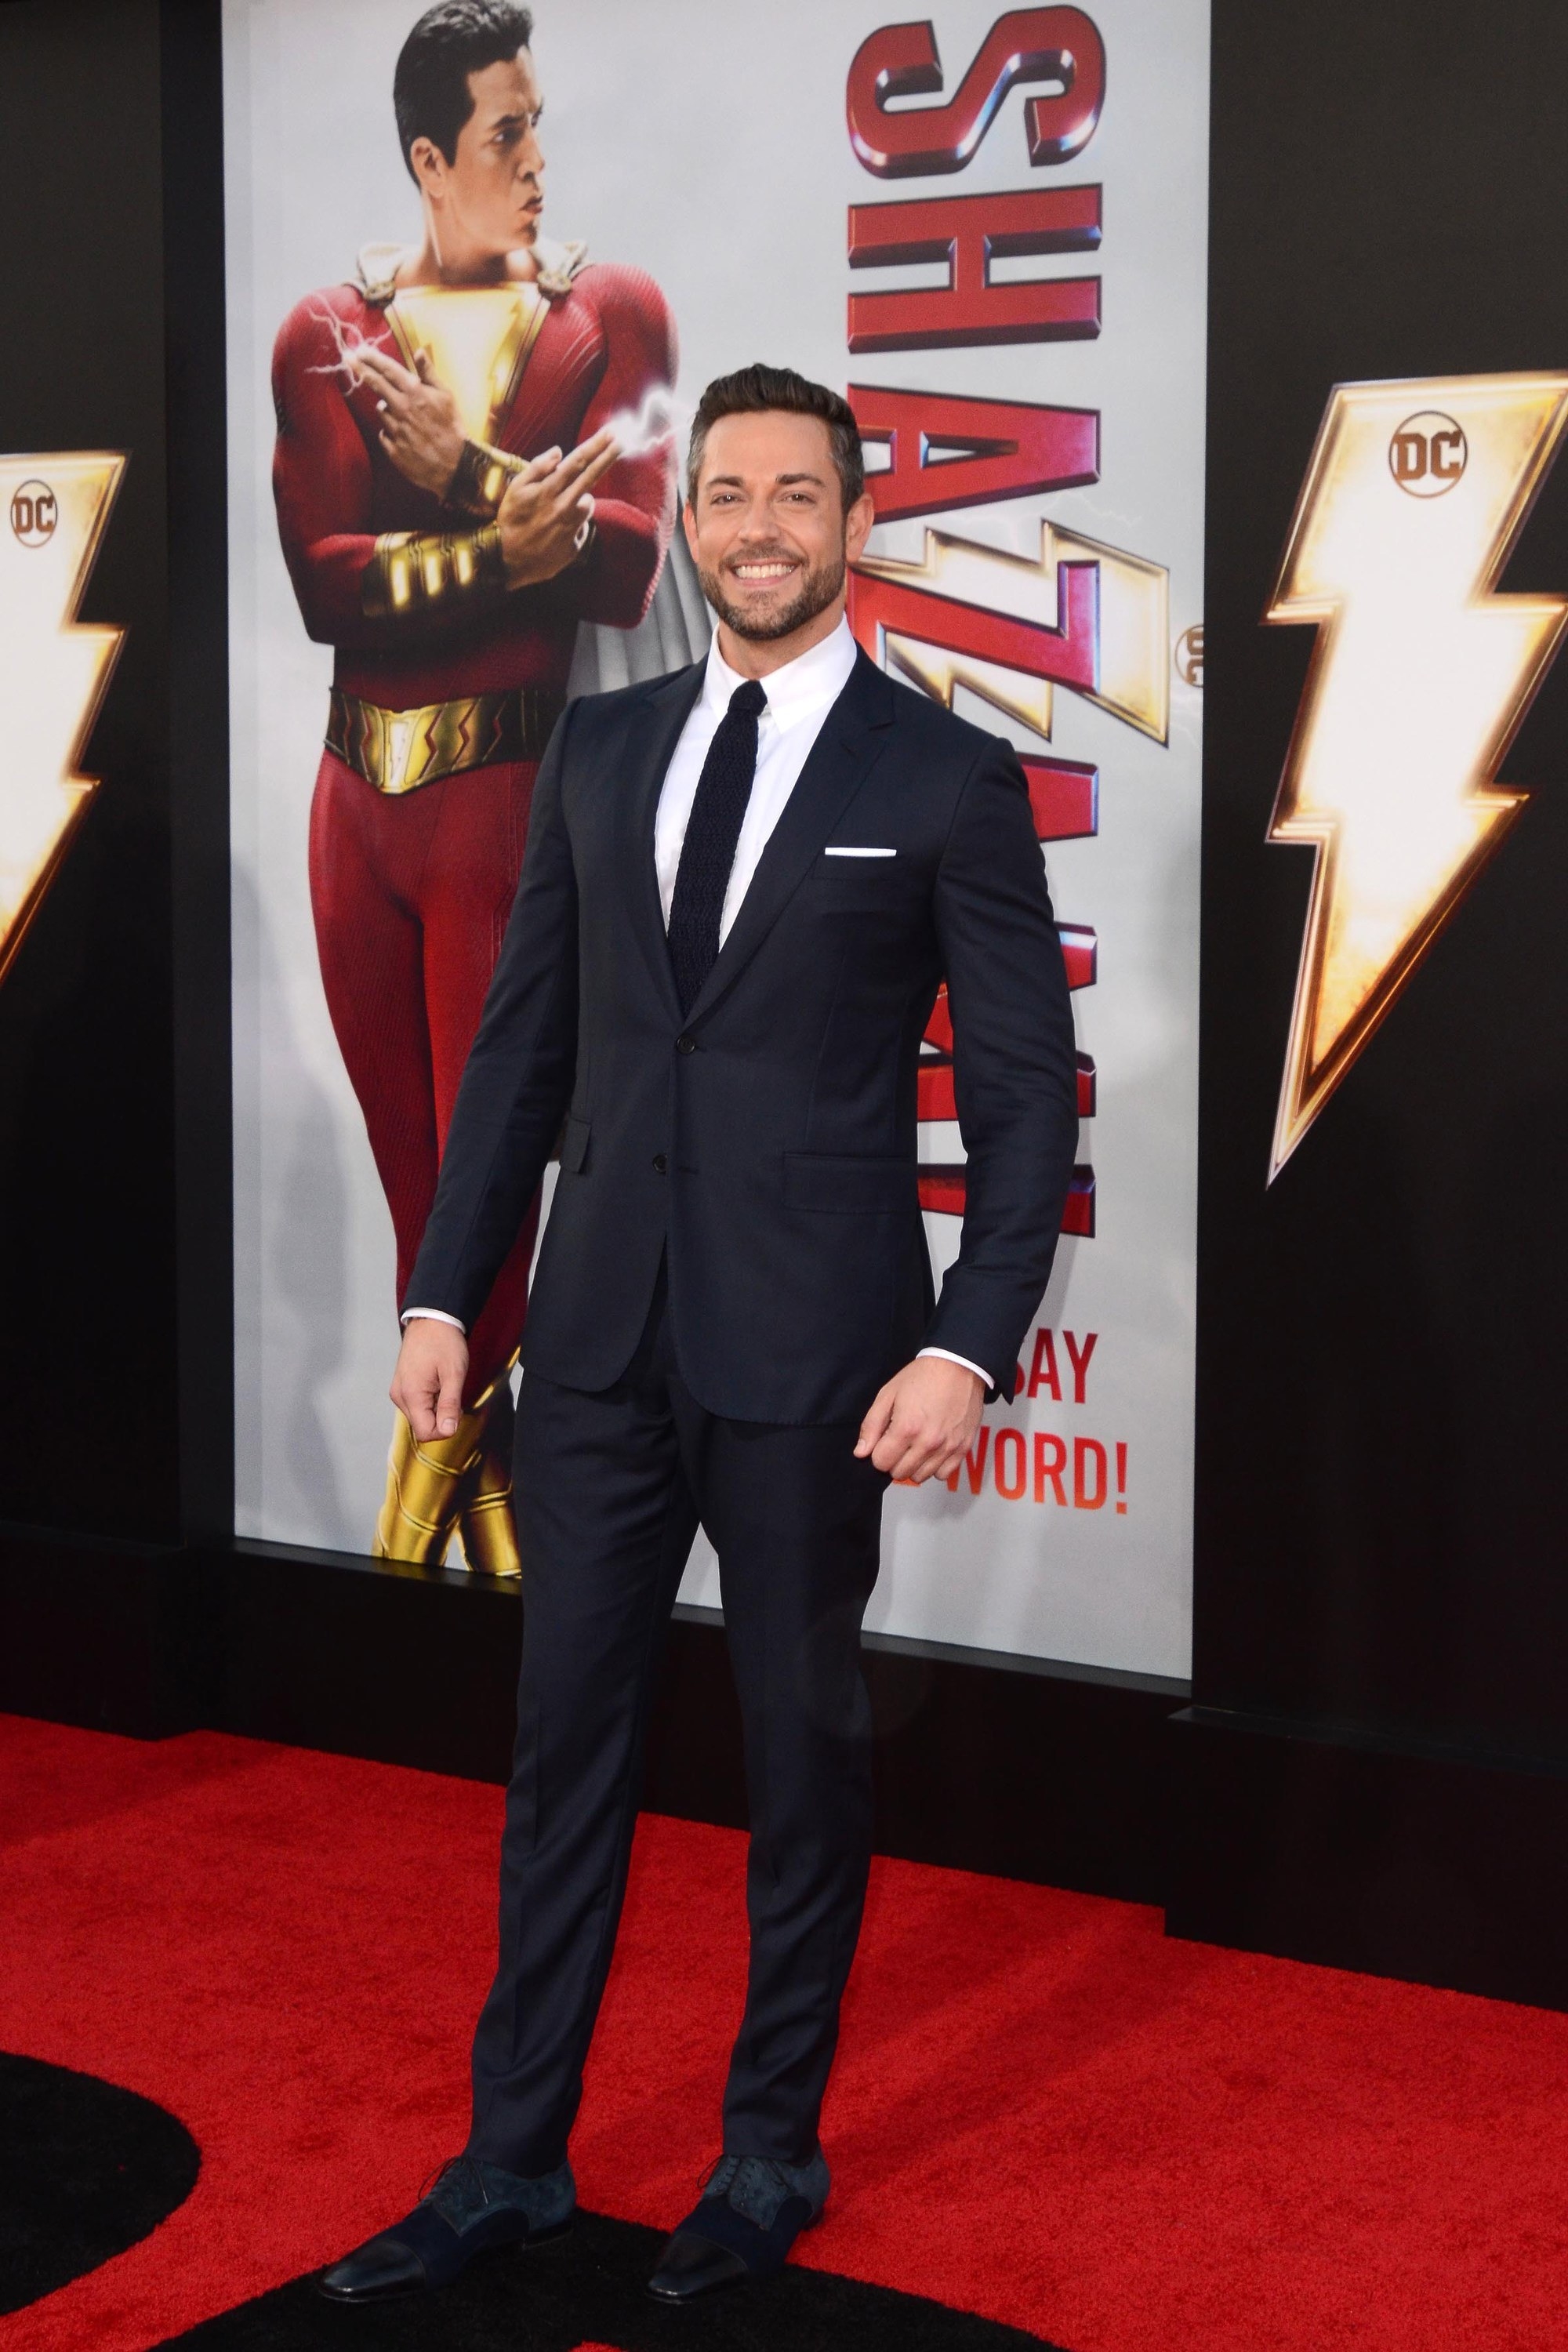 Zachary Levi on the red carpet